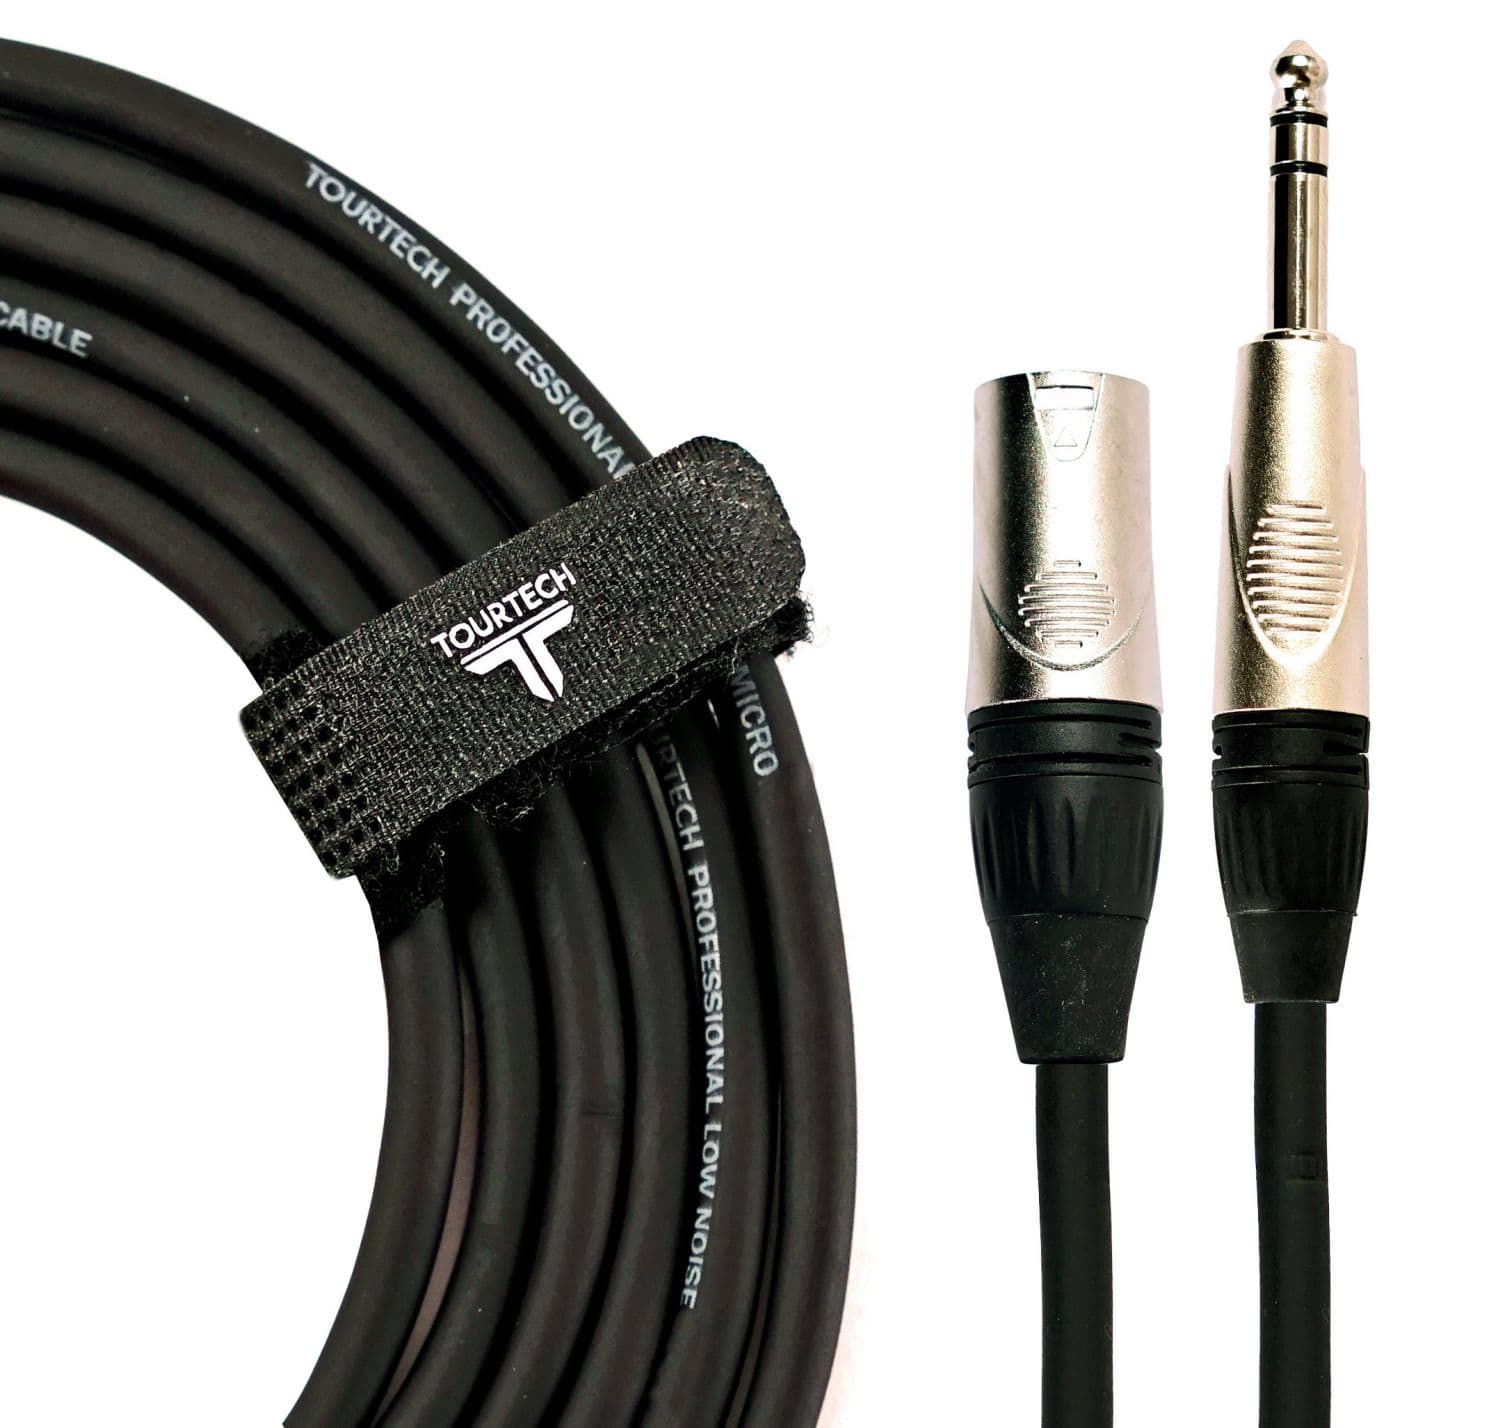 An image of TOURTECH XLR Male to Stereo 1/4 Jack Cable, 6m - Gift for a Musician | PMT Onlin...